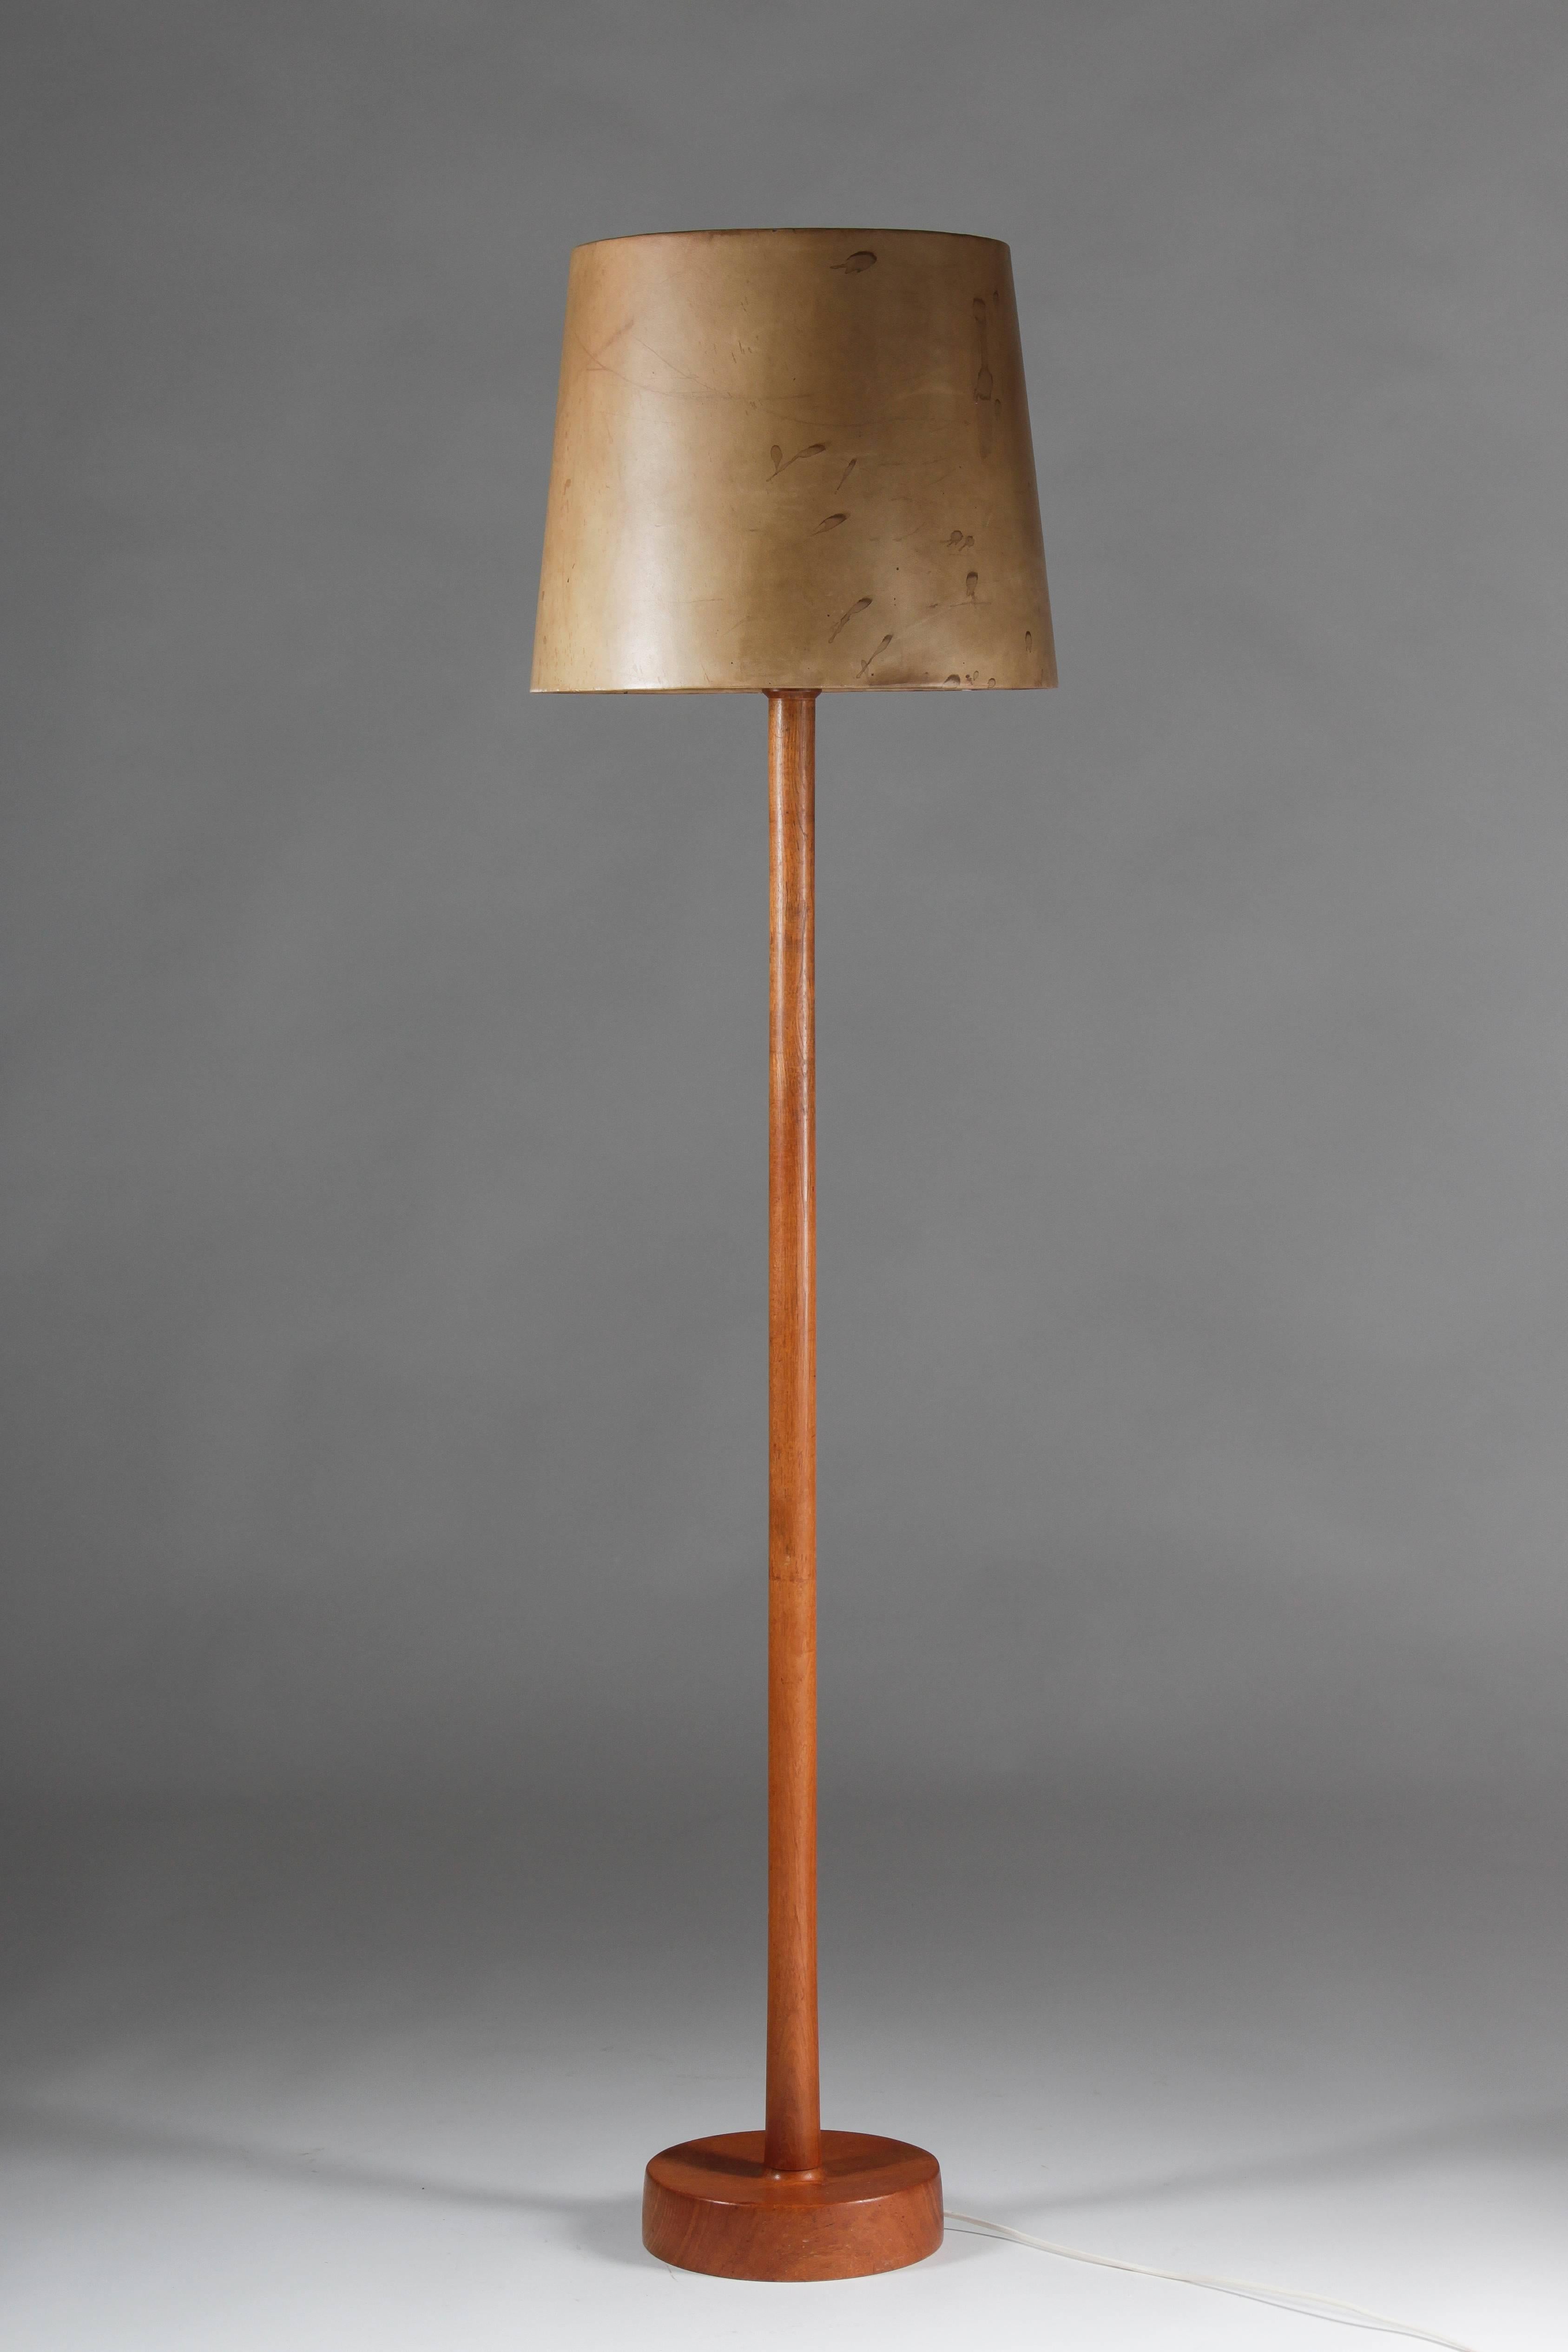 Big floor lamp in teak by Uno & Östen Kristiansson for Luxus. This lamp features a shade made of leather and showing a beautiful natural patina. As always with Luxus products, it shows great quality.